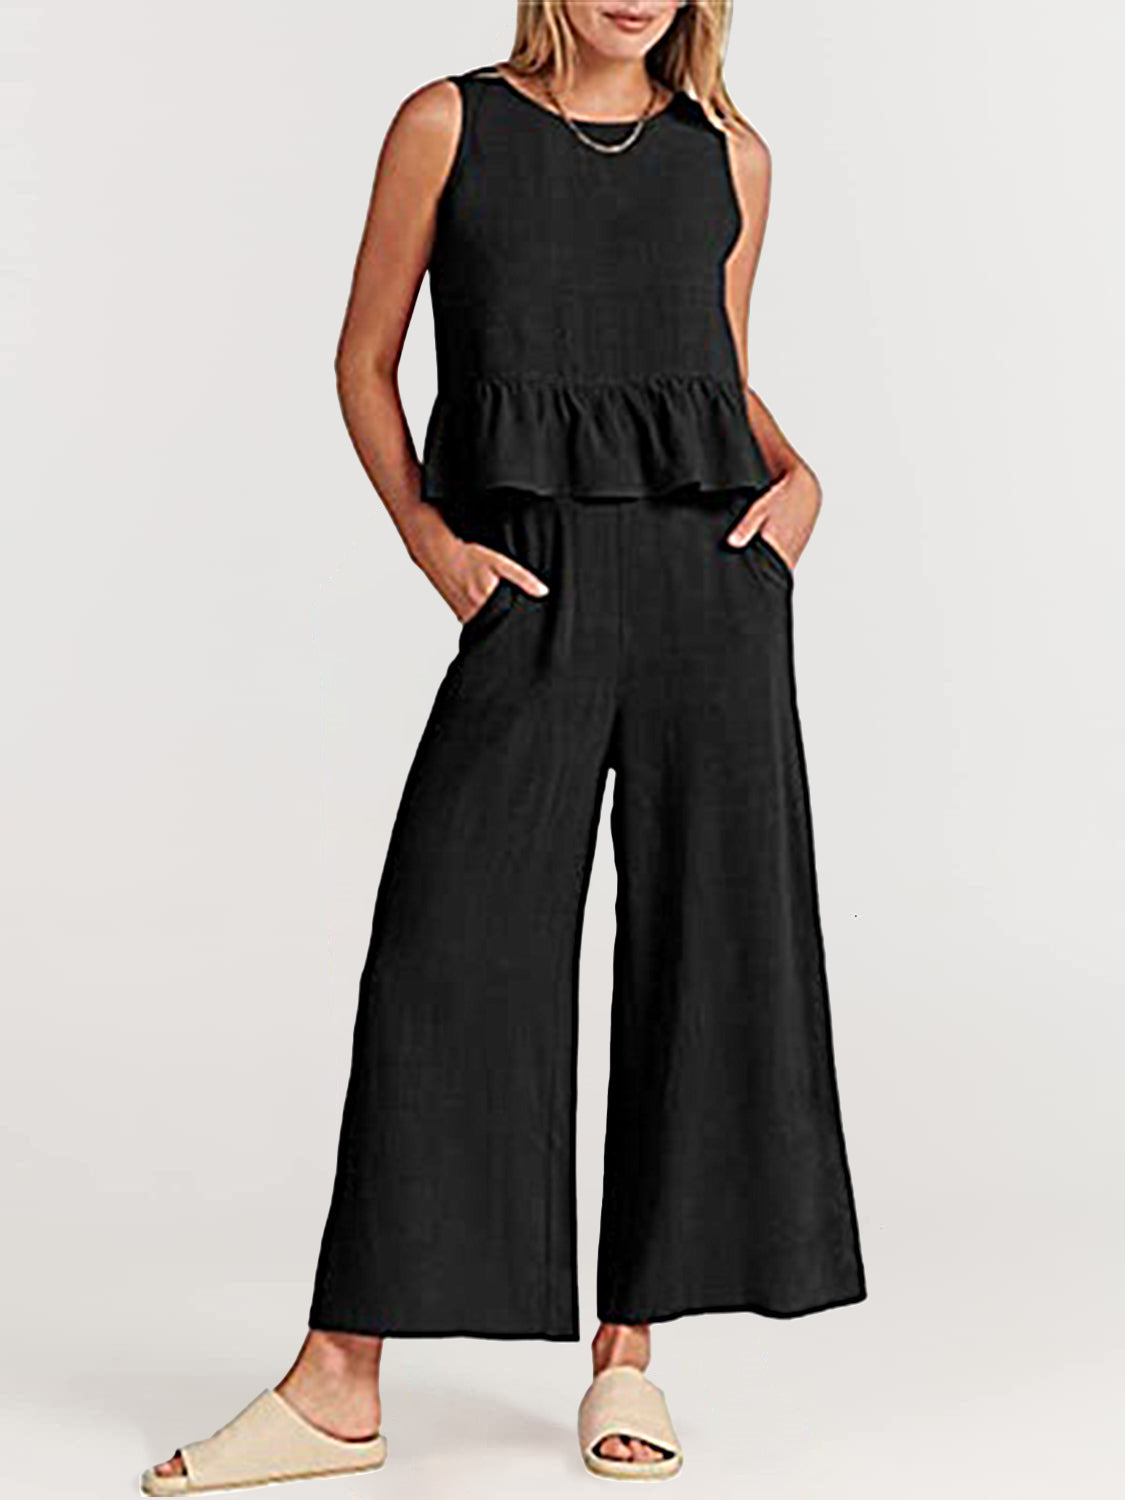 NTG Fad Two Pieces Sets Black / S(4-6) Two Piece Outfits Sleeveless Top and Wide Leg Pants Lounge Set